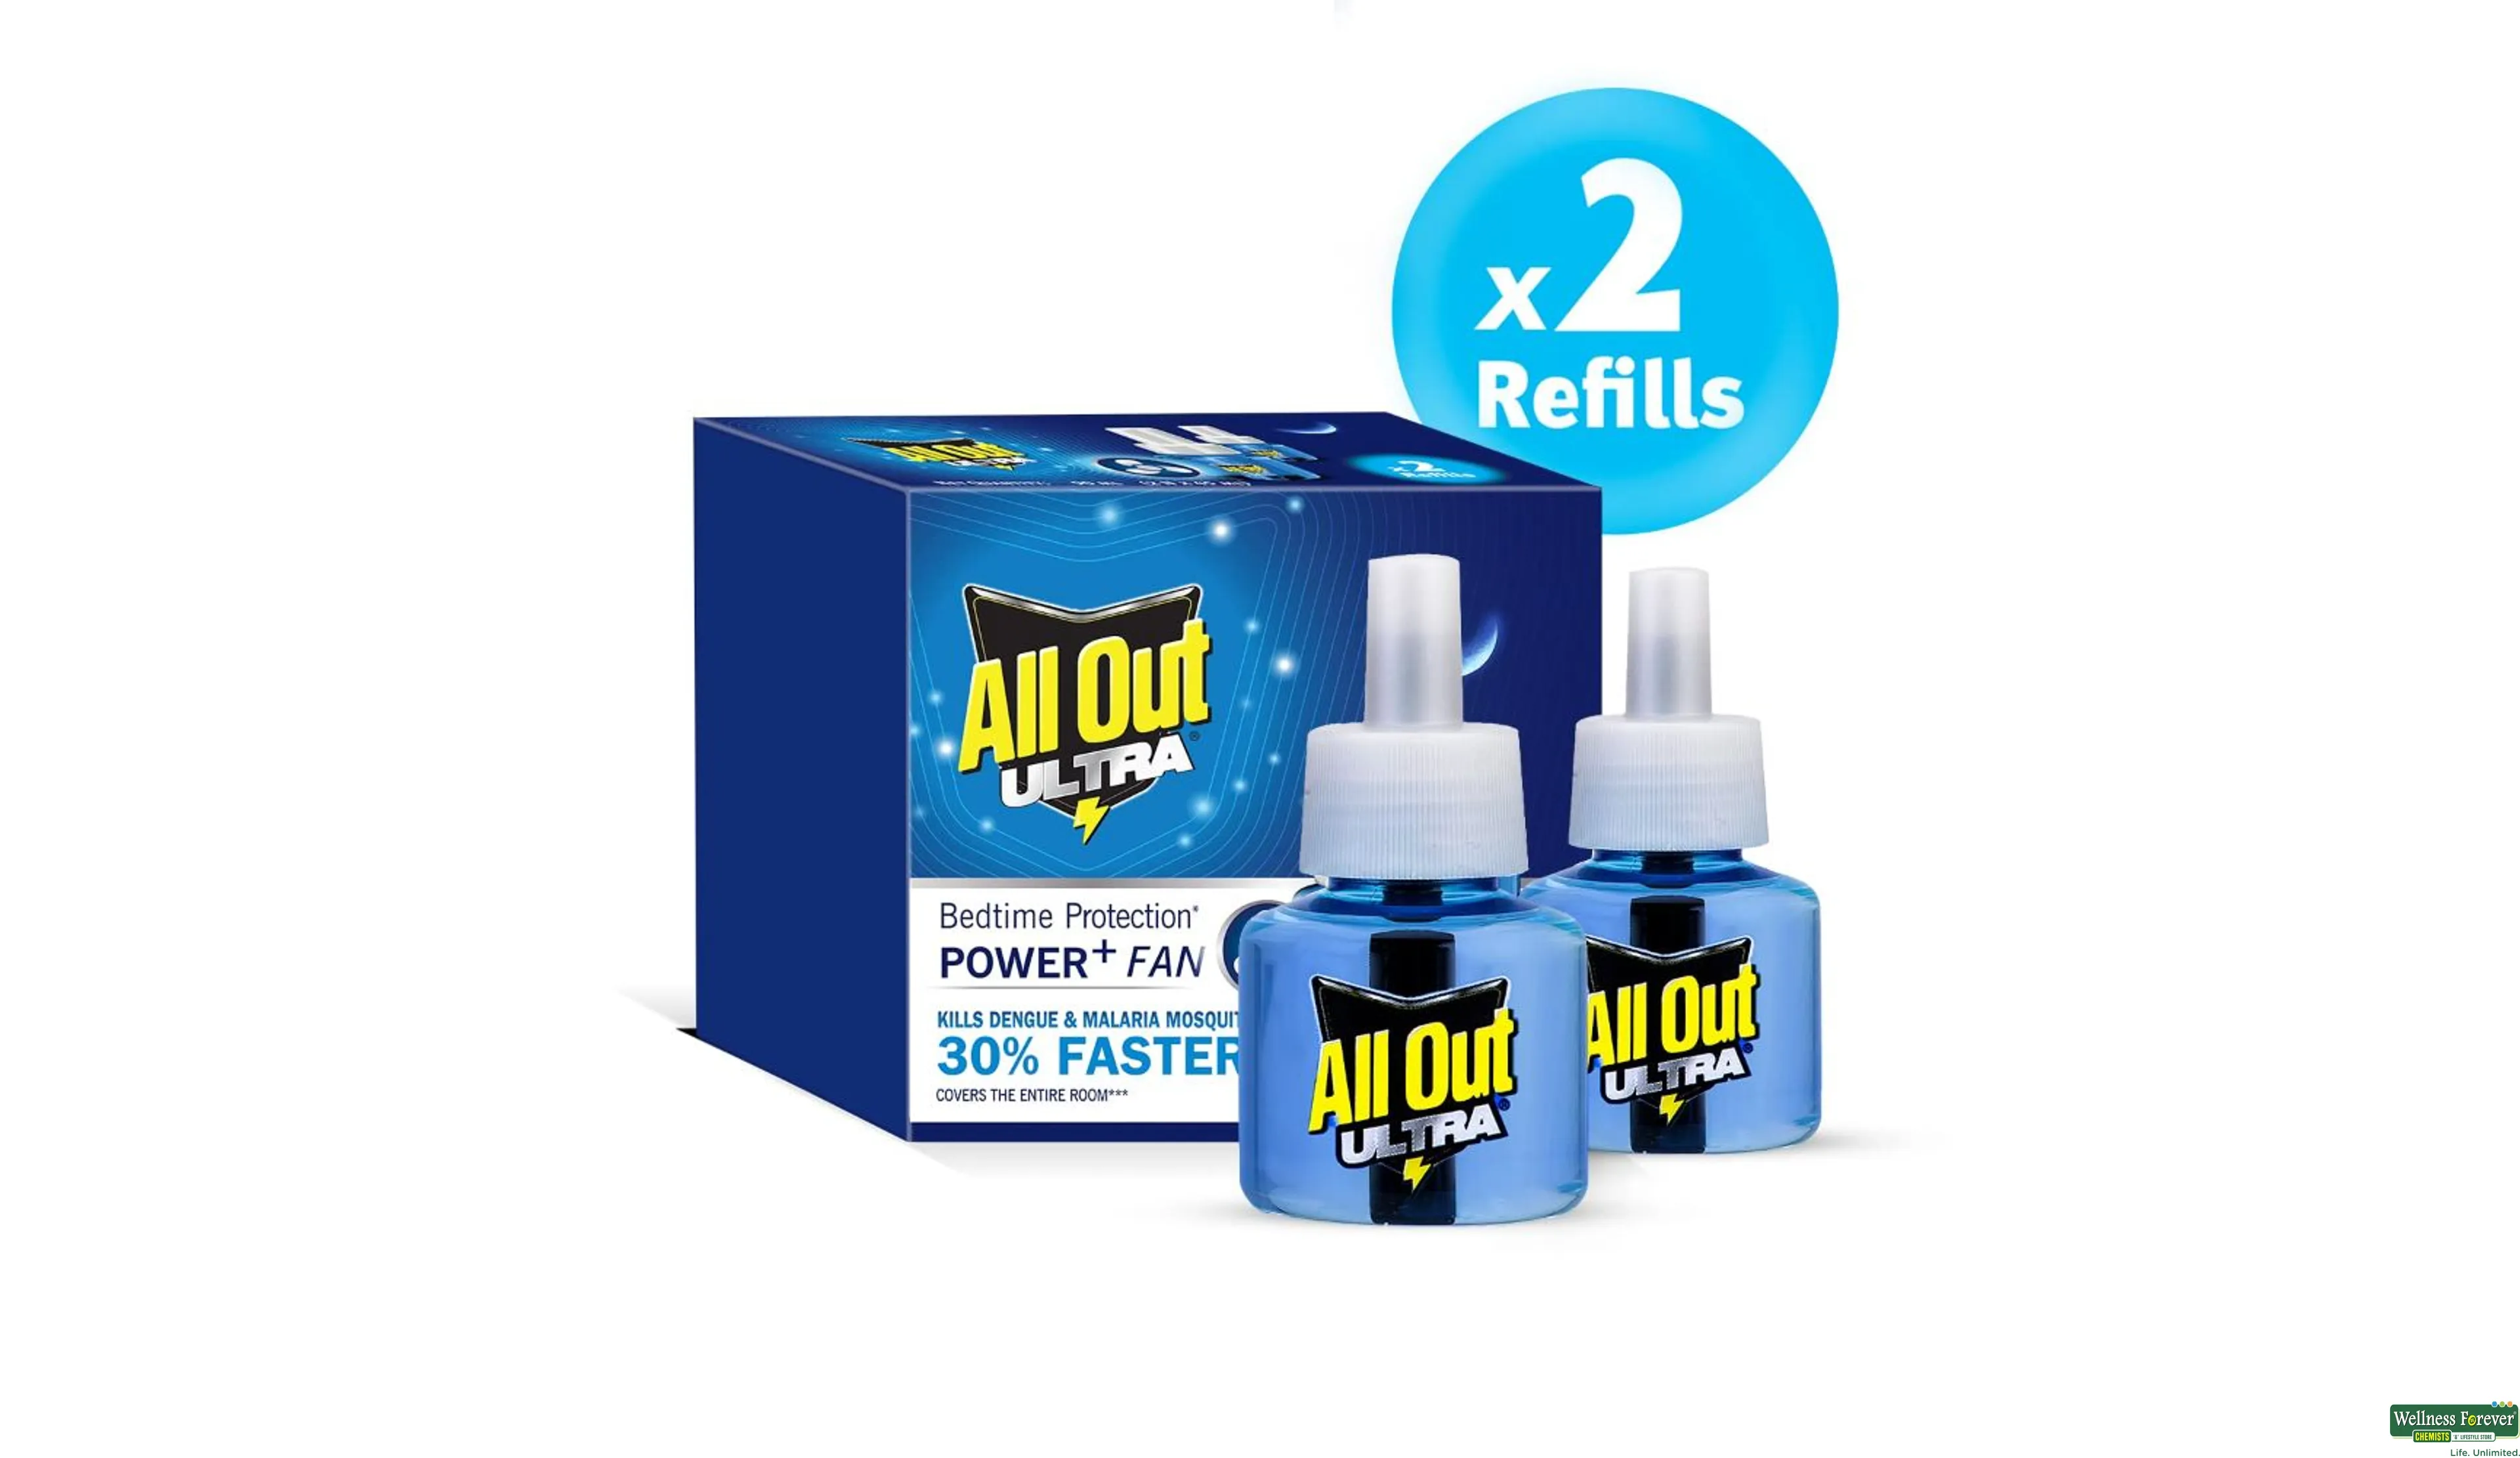 ALLOUT MOSQUITO ULTRA KIT/REF 2X45ML- 1, 2PC, 